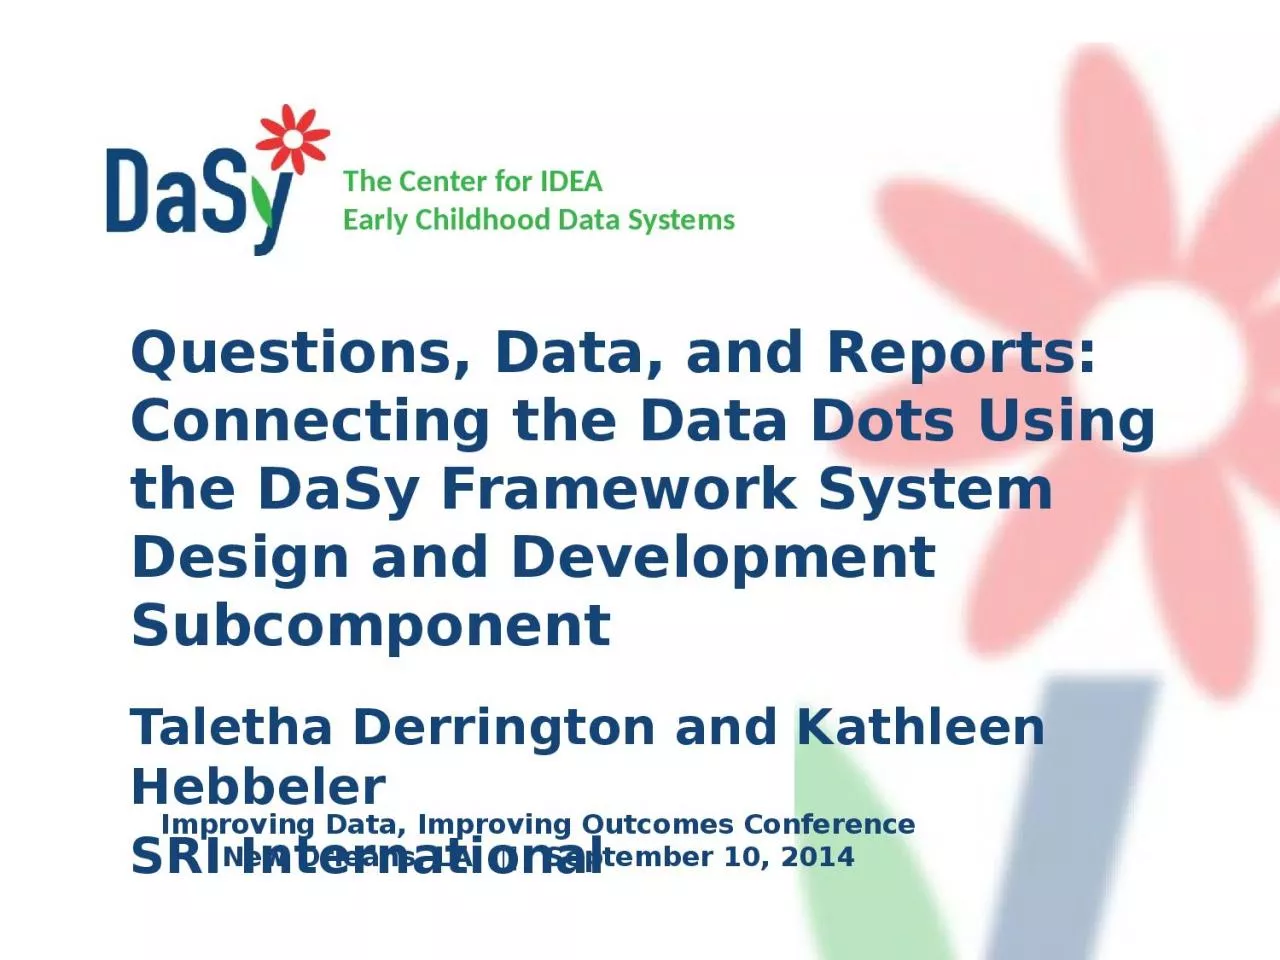 Questions, Data, and Reports: Connecting the Data Dots Using the DaSy Framework System